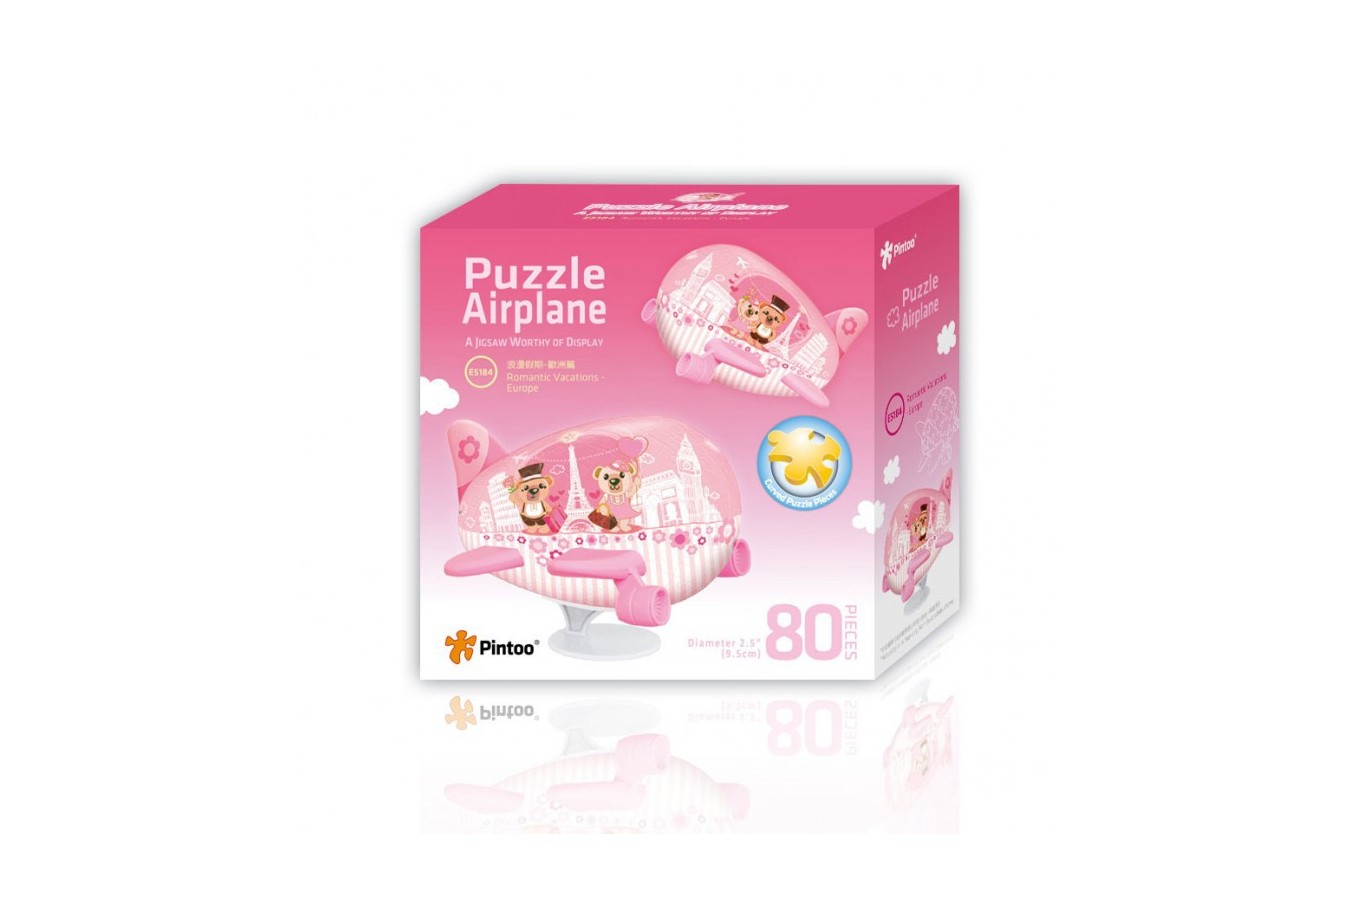 Puzzle 3D din plastic Pintoo - Airplane Puzzle - Romantic Holidays in Europe, 80 piese (E5184)